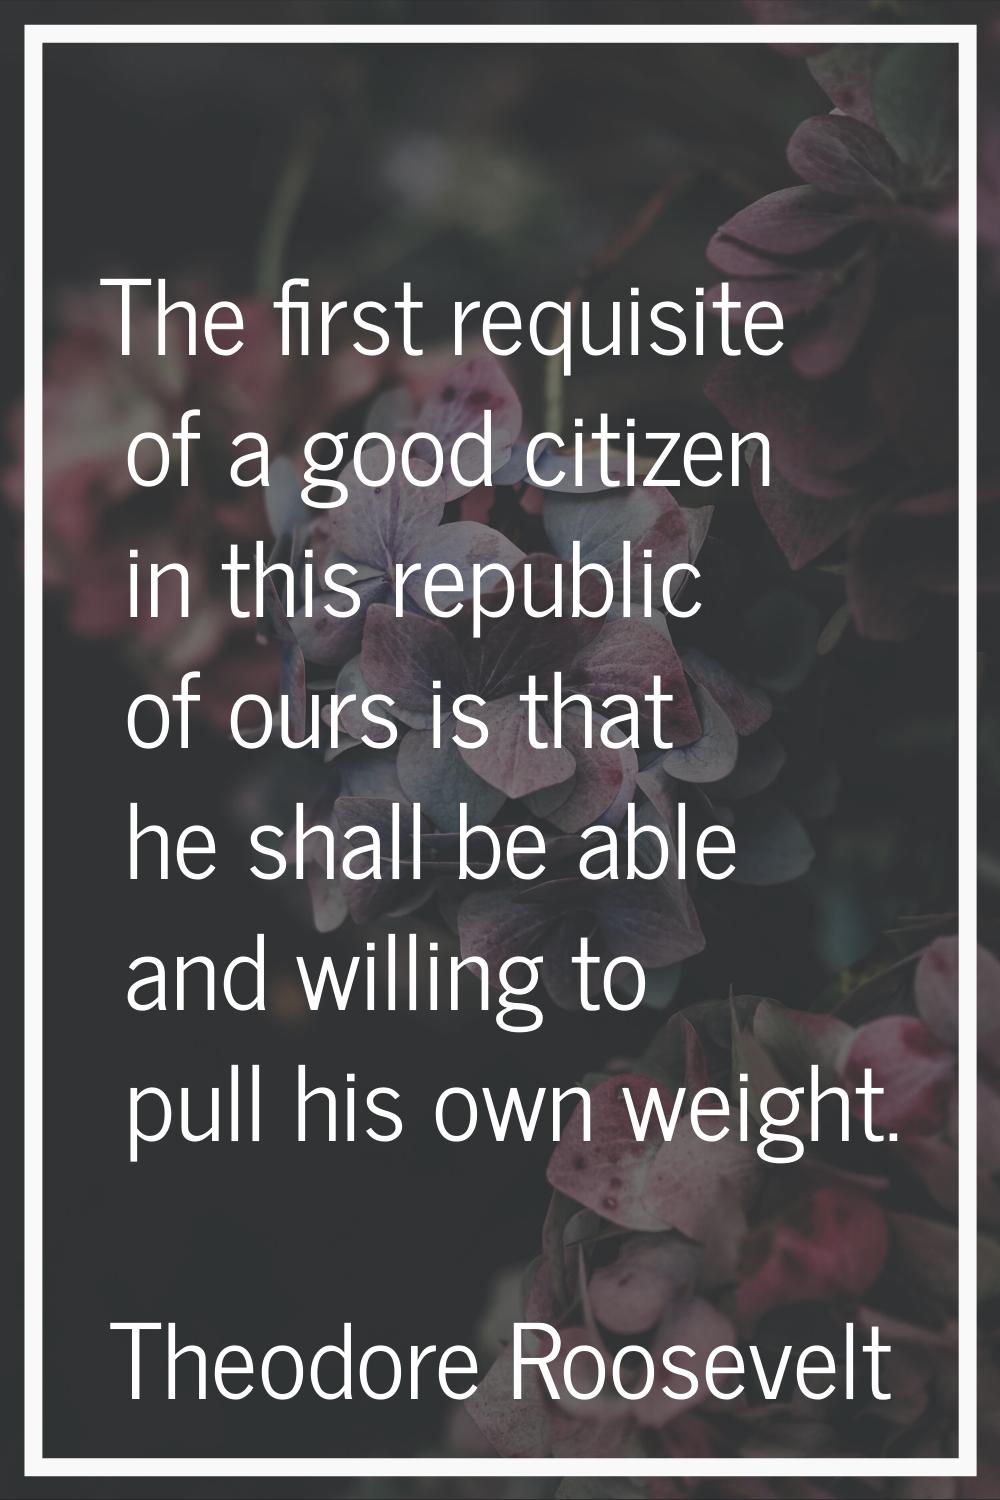 The first requisite of a good citizen in this republic of ours is that he shall be able and willing